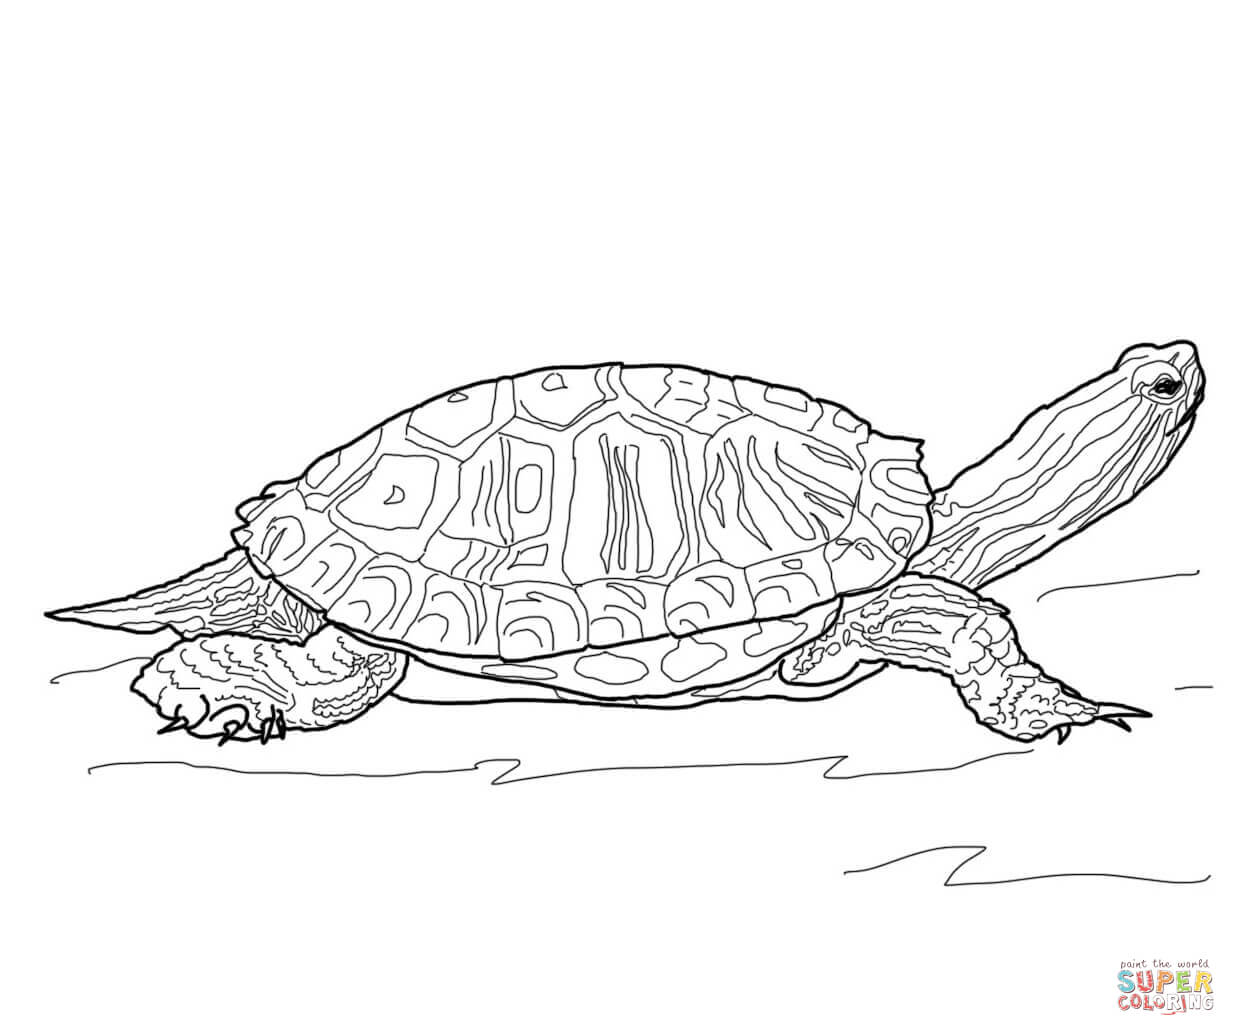 Red-Eared Slider Turtle coloring page | Free Printable Coloring Pages